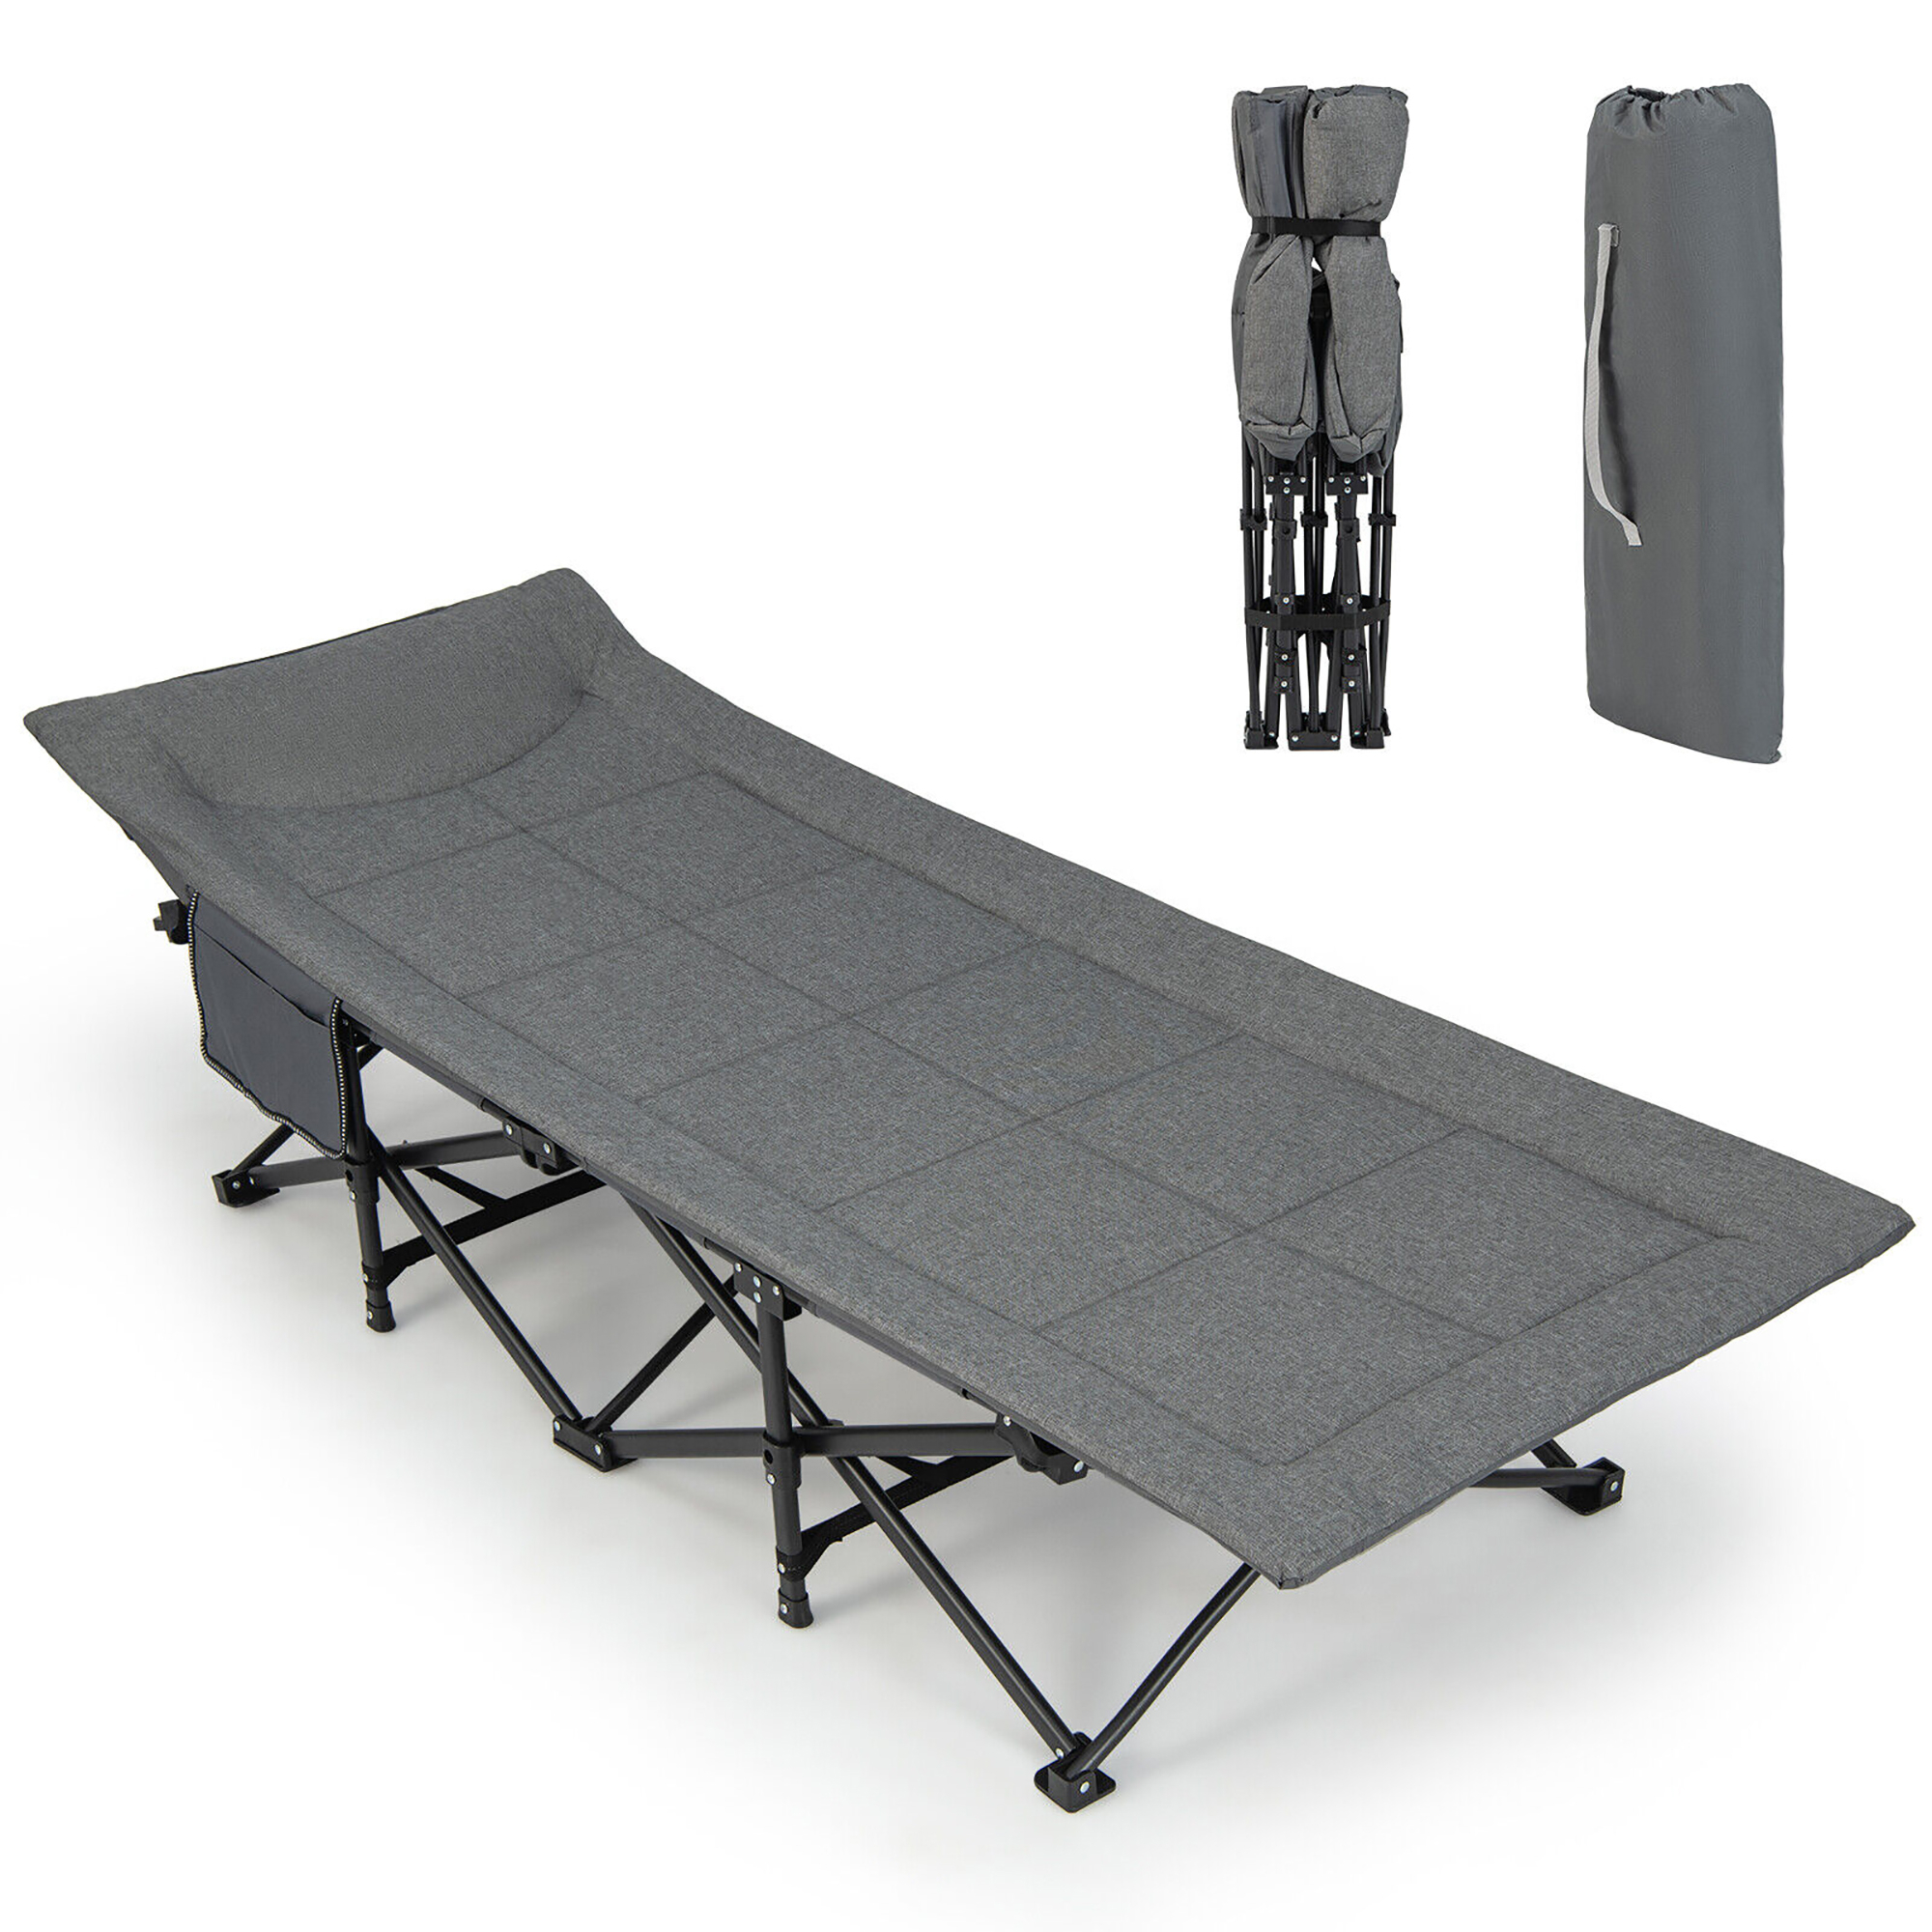 Folding Camping Cot Portable Tent Sleeping Bed With Cushion Headrest Carry Bag - Grey